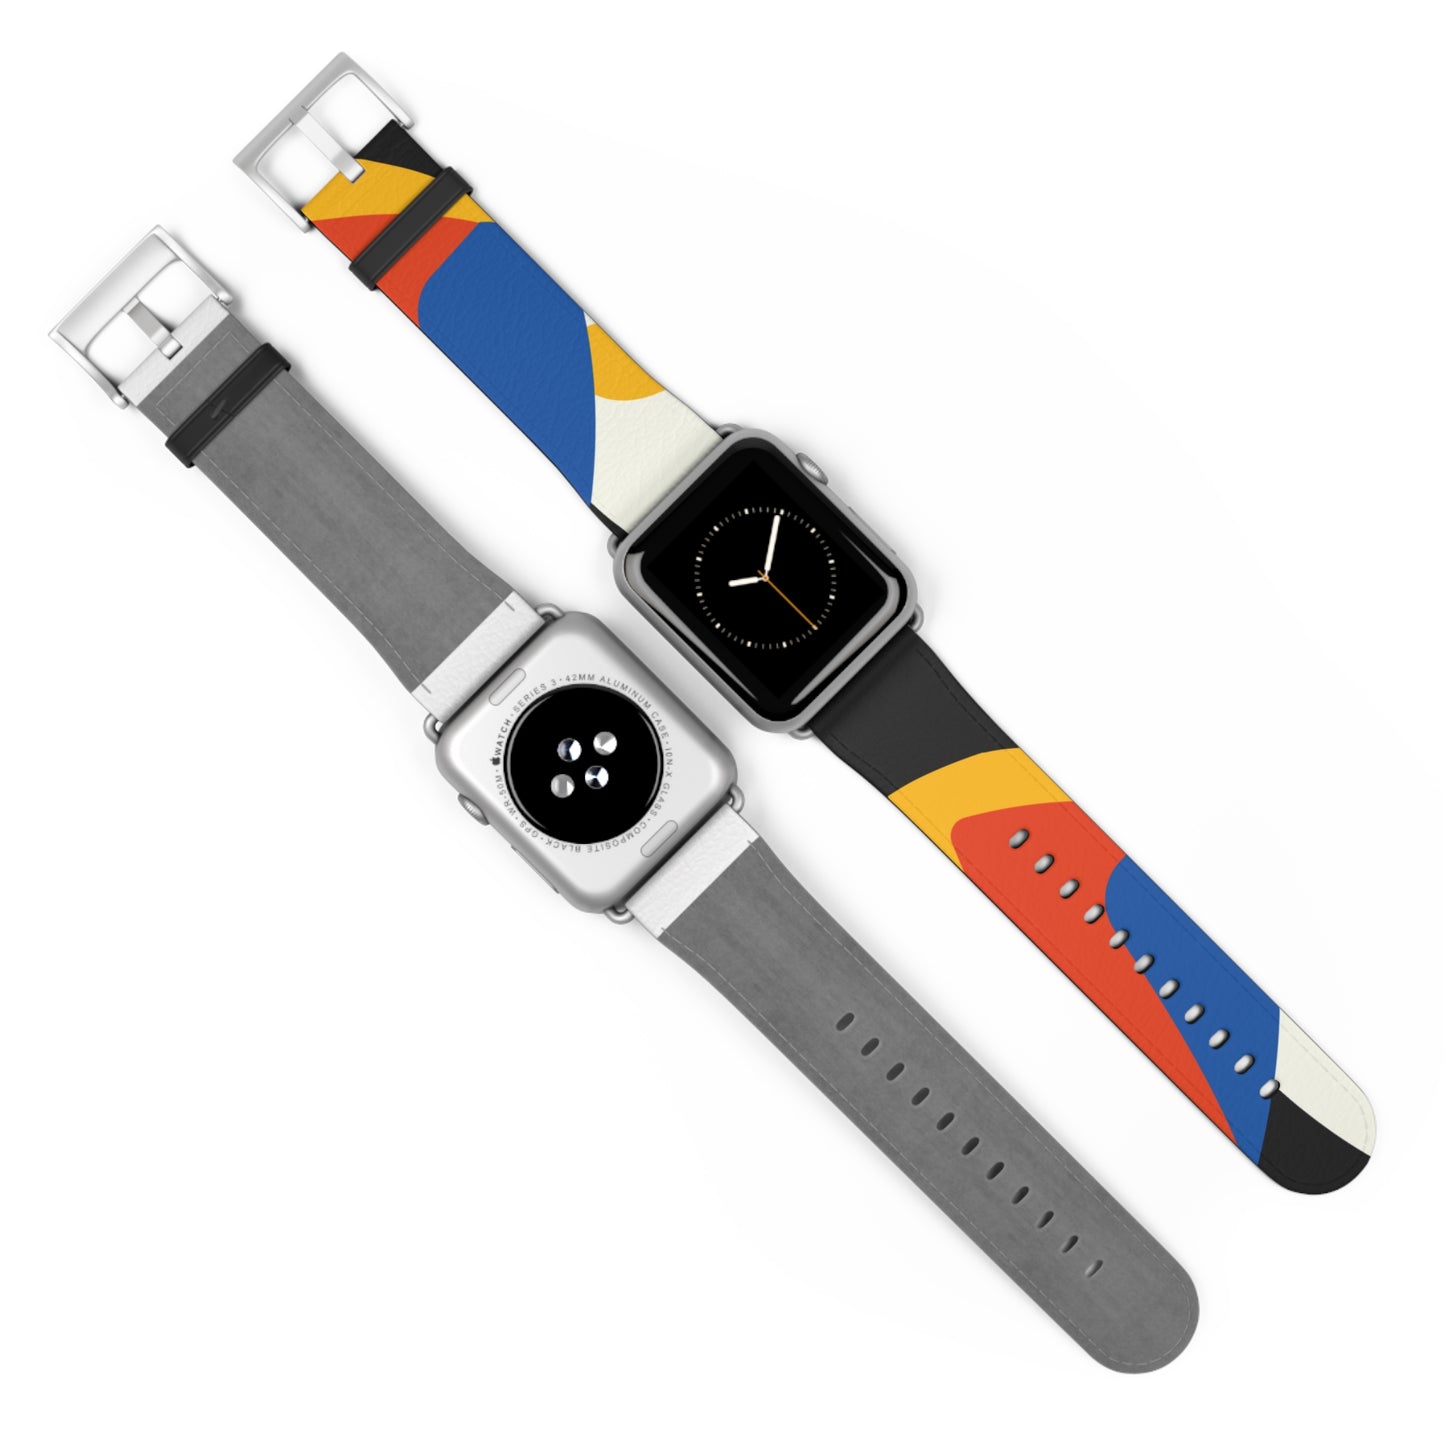 RED, YELLOW, BLUE MODERN APPLE® WATCH BAND